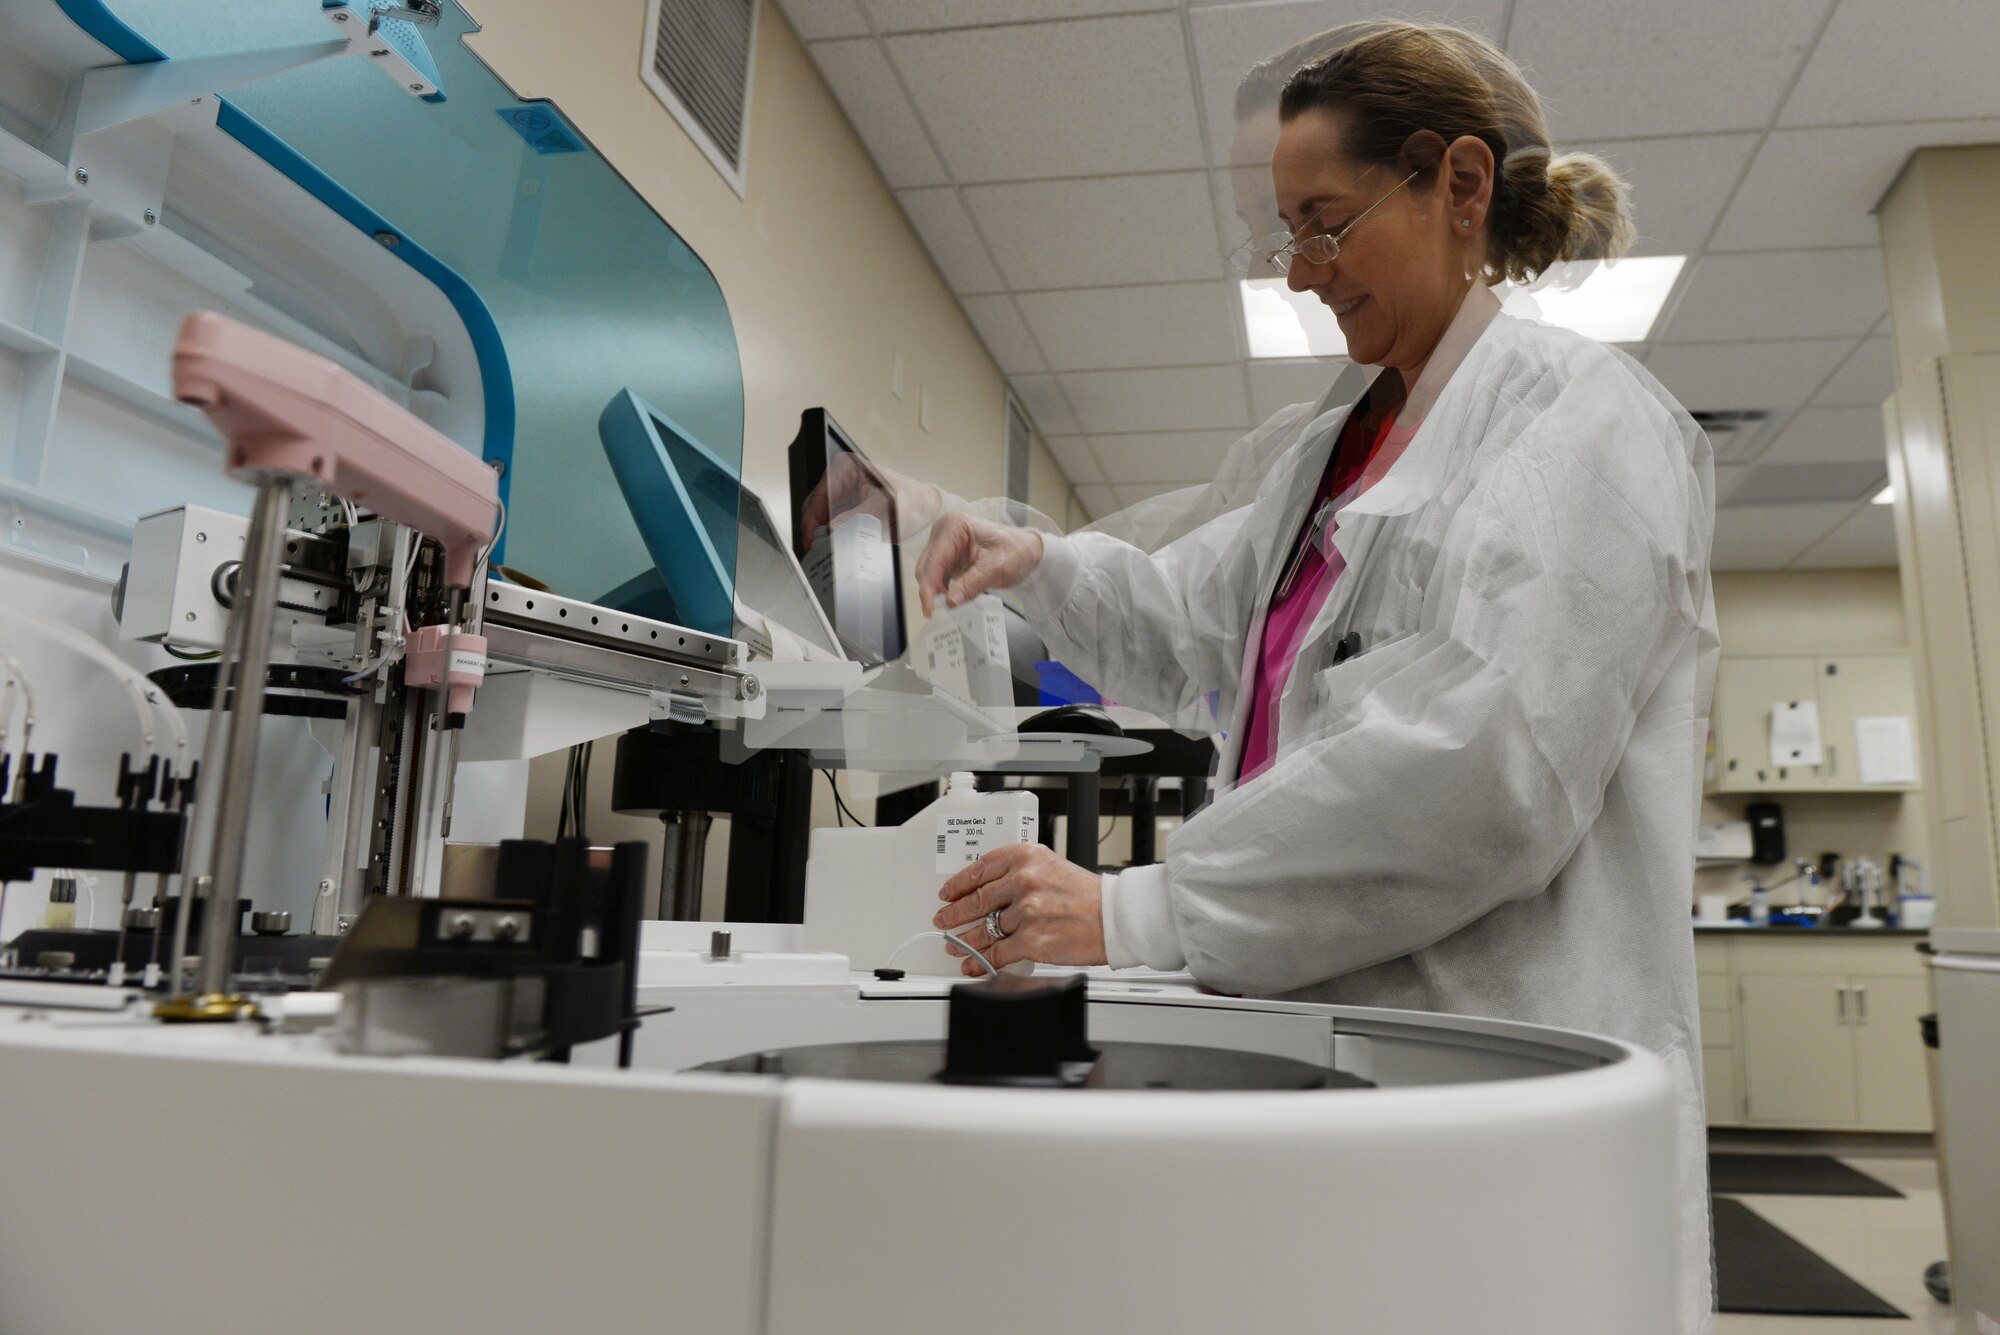 Patti James, a 28th Medical Support Squadron medical laboratory technologist, prepares a medical centrifuge for the day at Ellsworth Air Force Base, S.D., Dec. 4, 2018. The centrifuge is used to test amylin, iron, glucose and other hormones in the blood. (U.S. Air Force photo by Airman 1st Class Nicolas Z. Erwin)